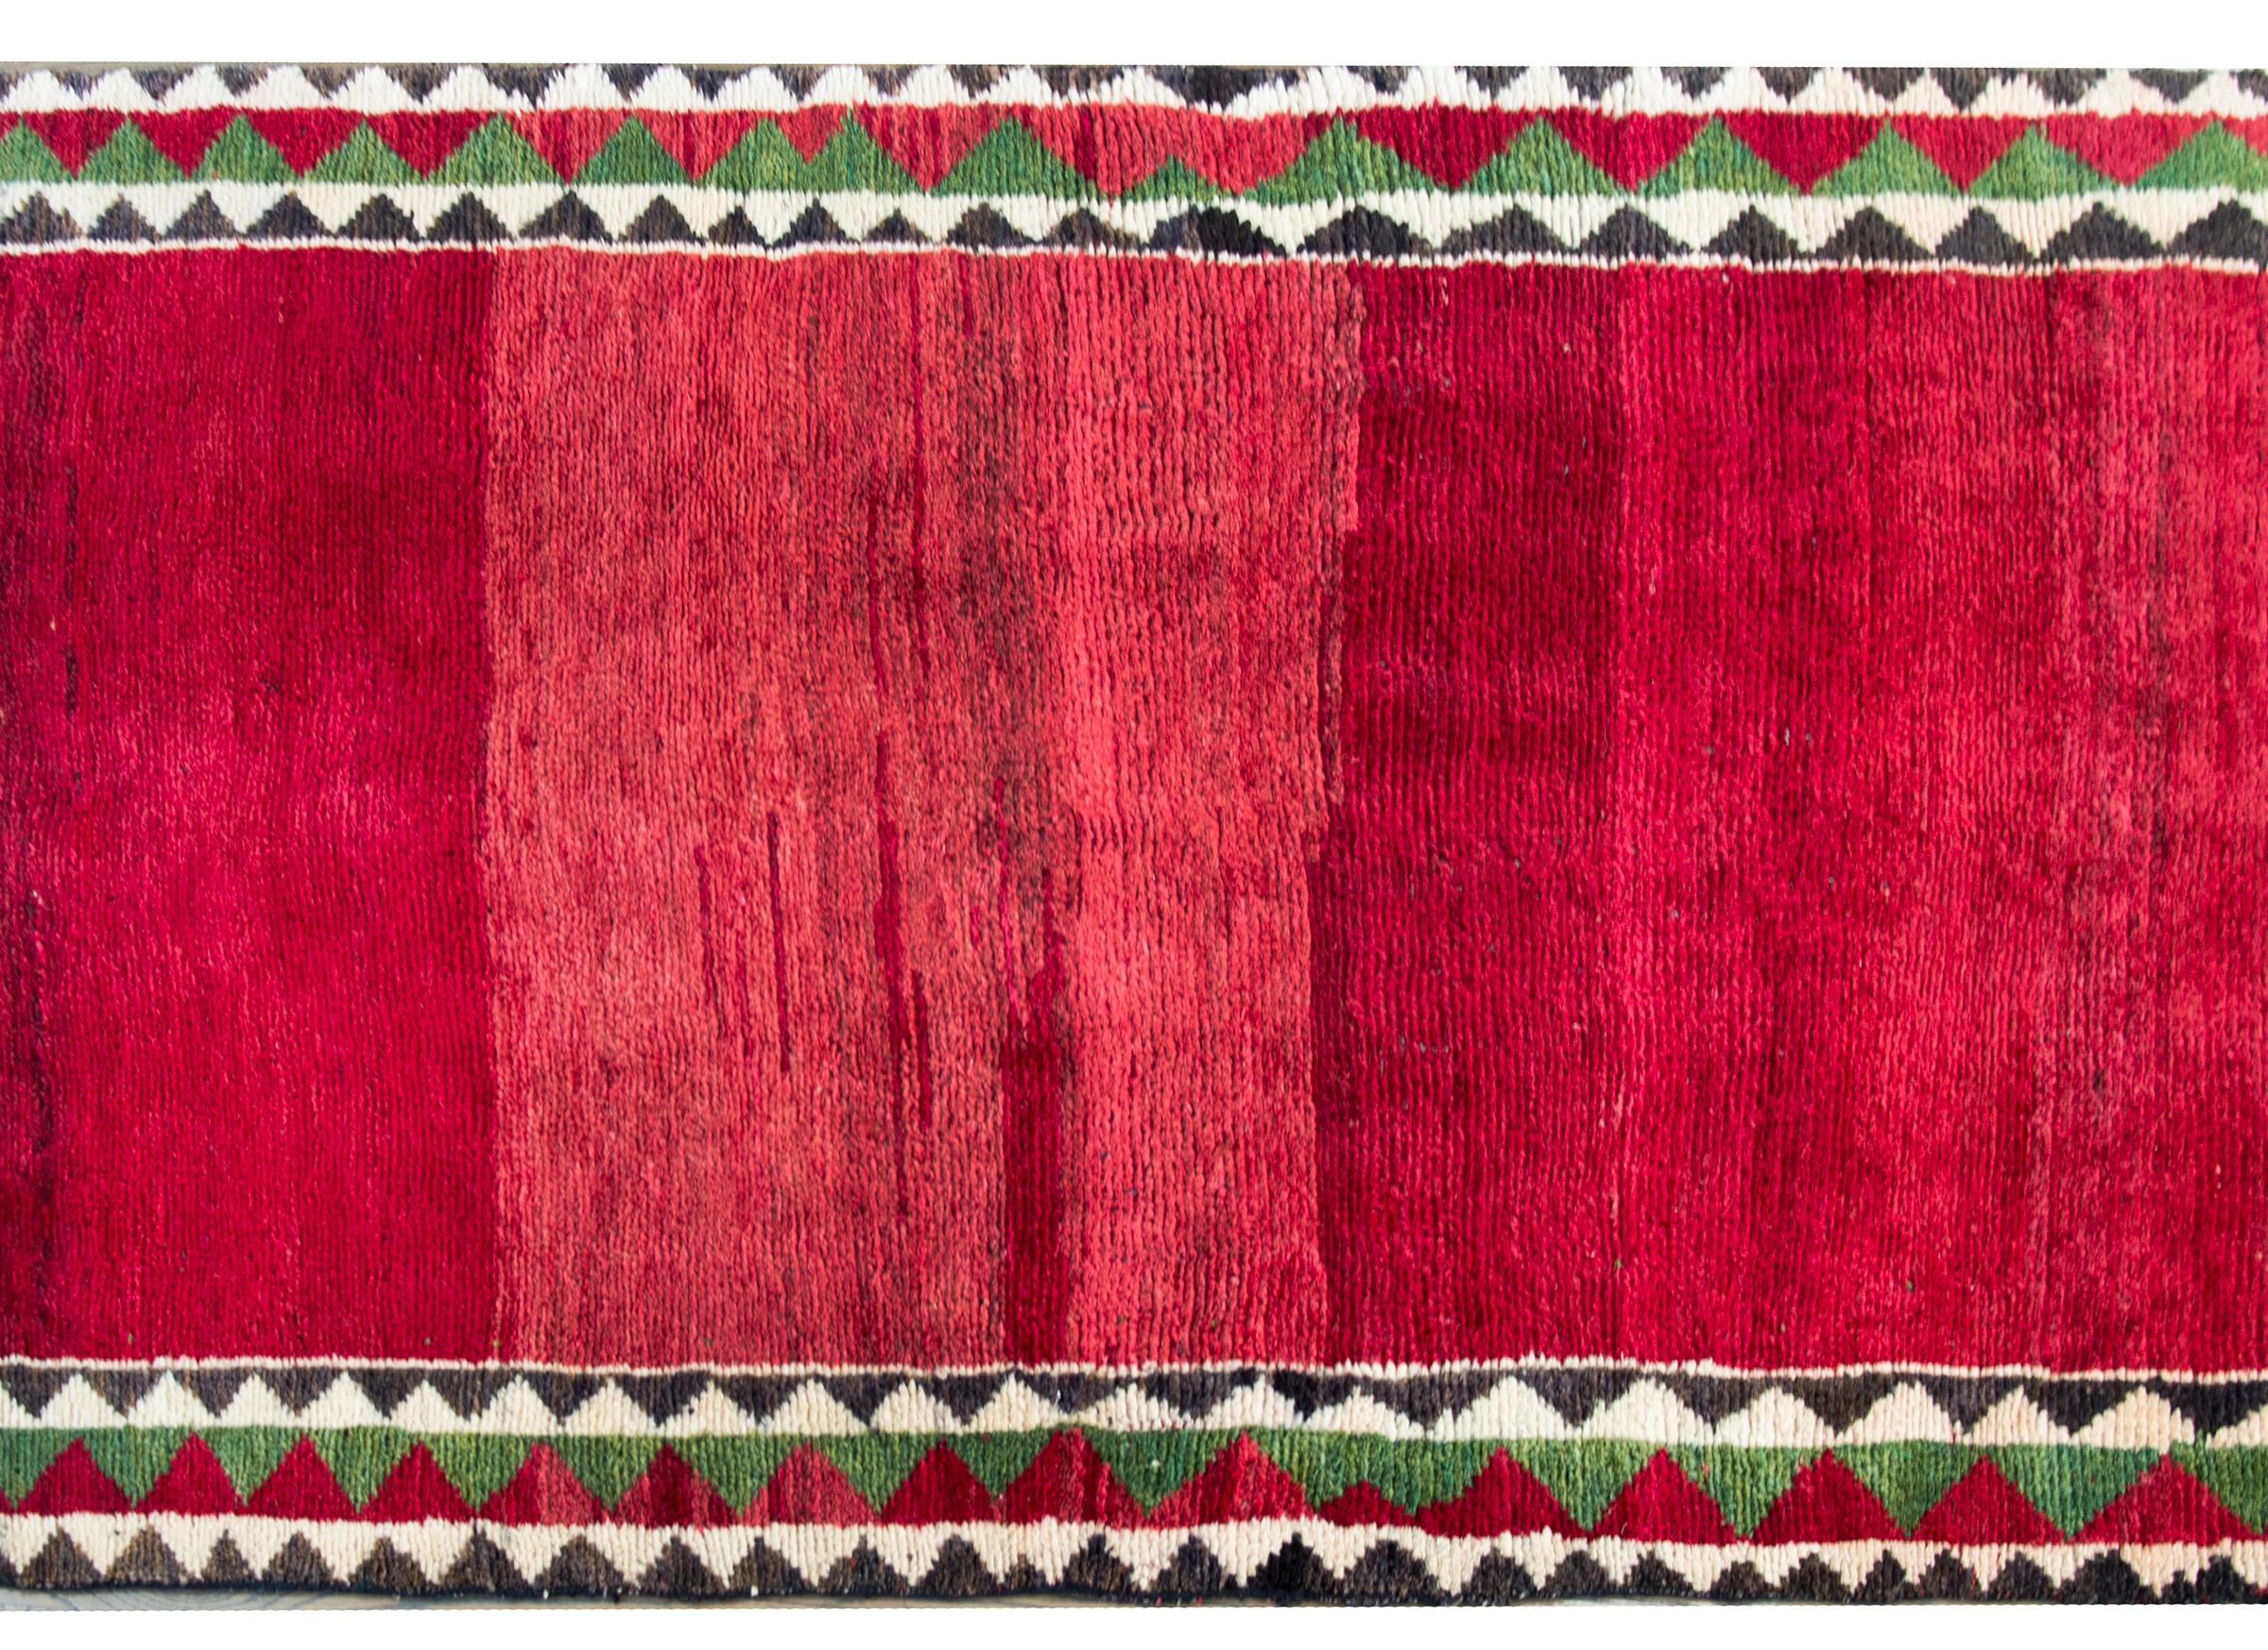 An incredible vintage Persian Gabbeh rug with a wonderful abrash crimson field surrounded by a geometric patterned border with alternating white, brown, green, and crimson triangle stripes.